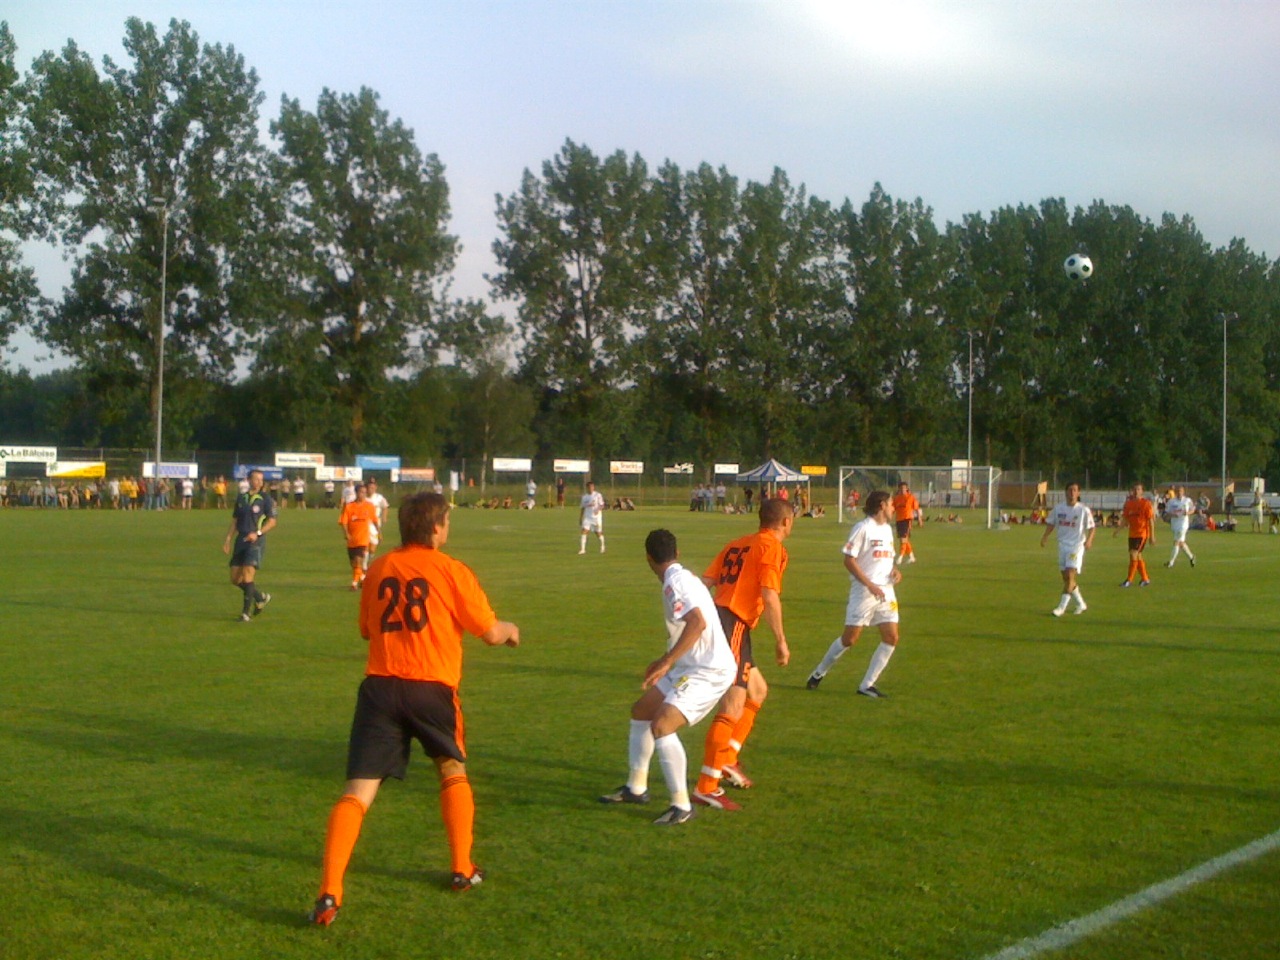 a group of boys playing soccer on a soccer field